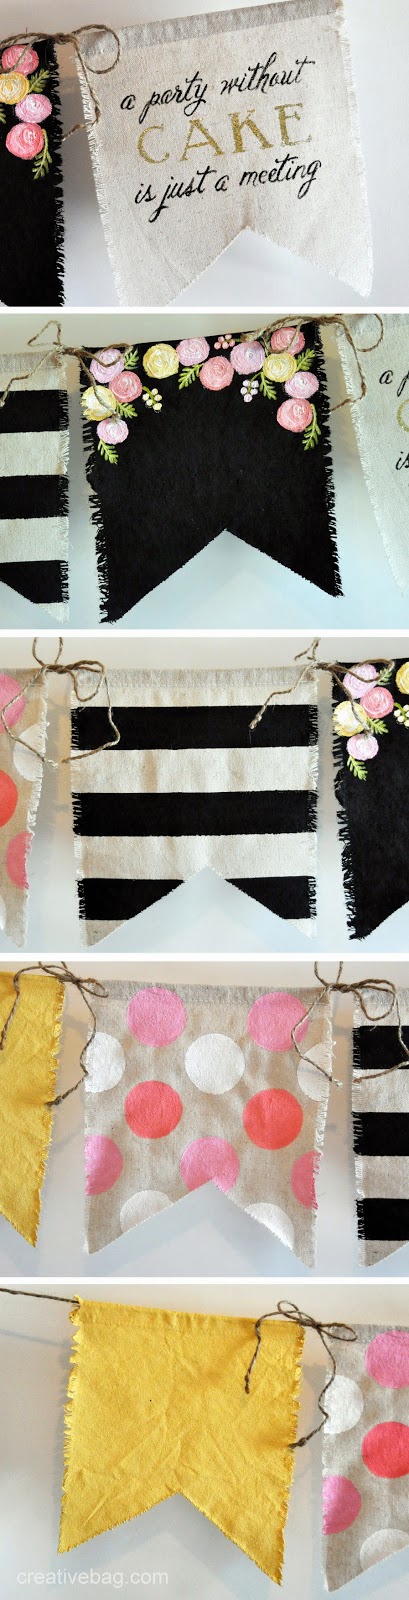 cute diy bunting inspiration for parties, weddings and special events | creativebag.com